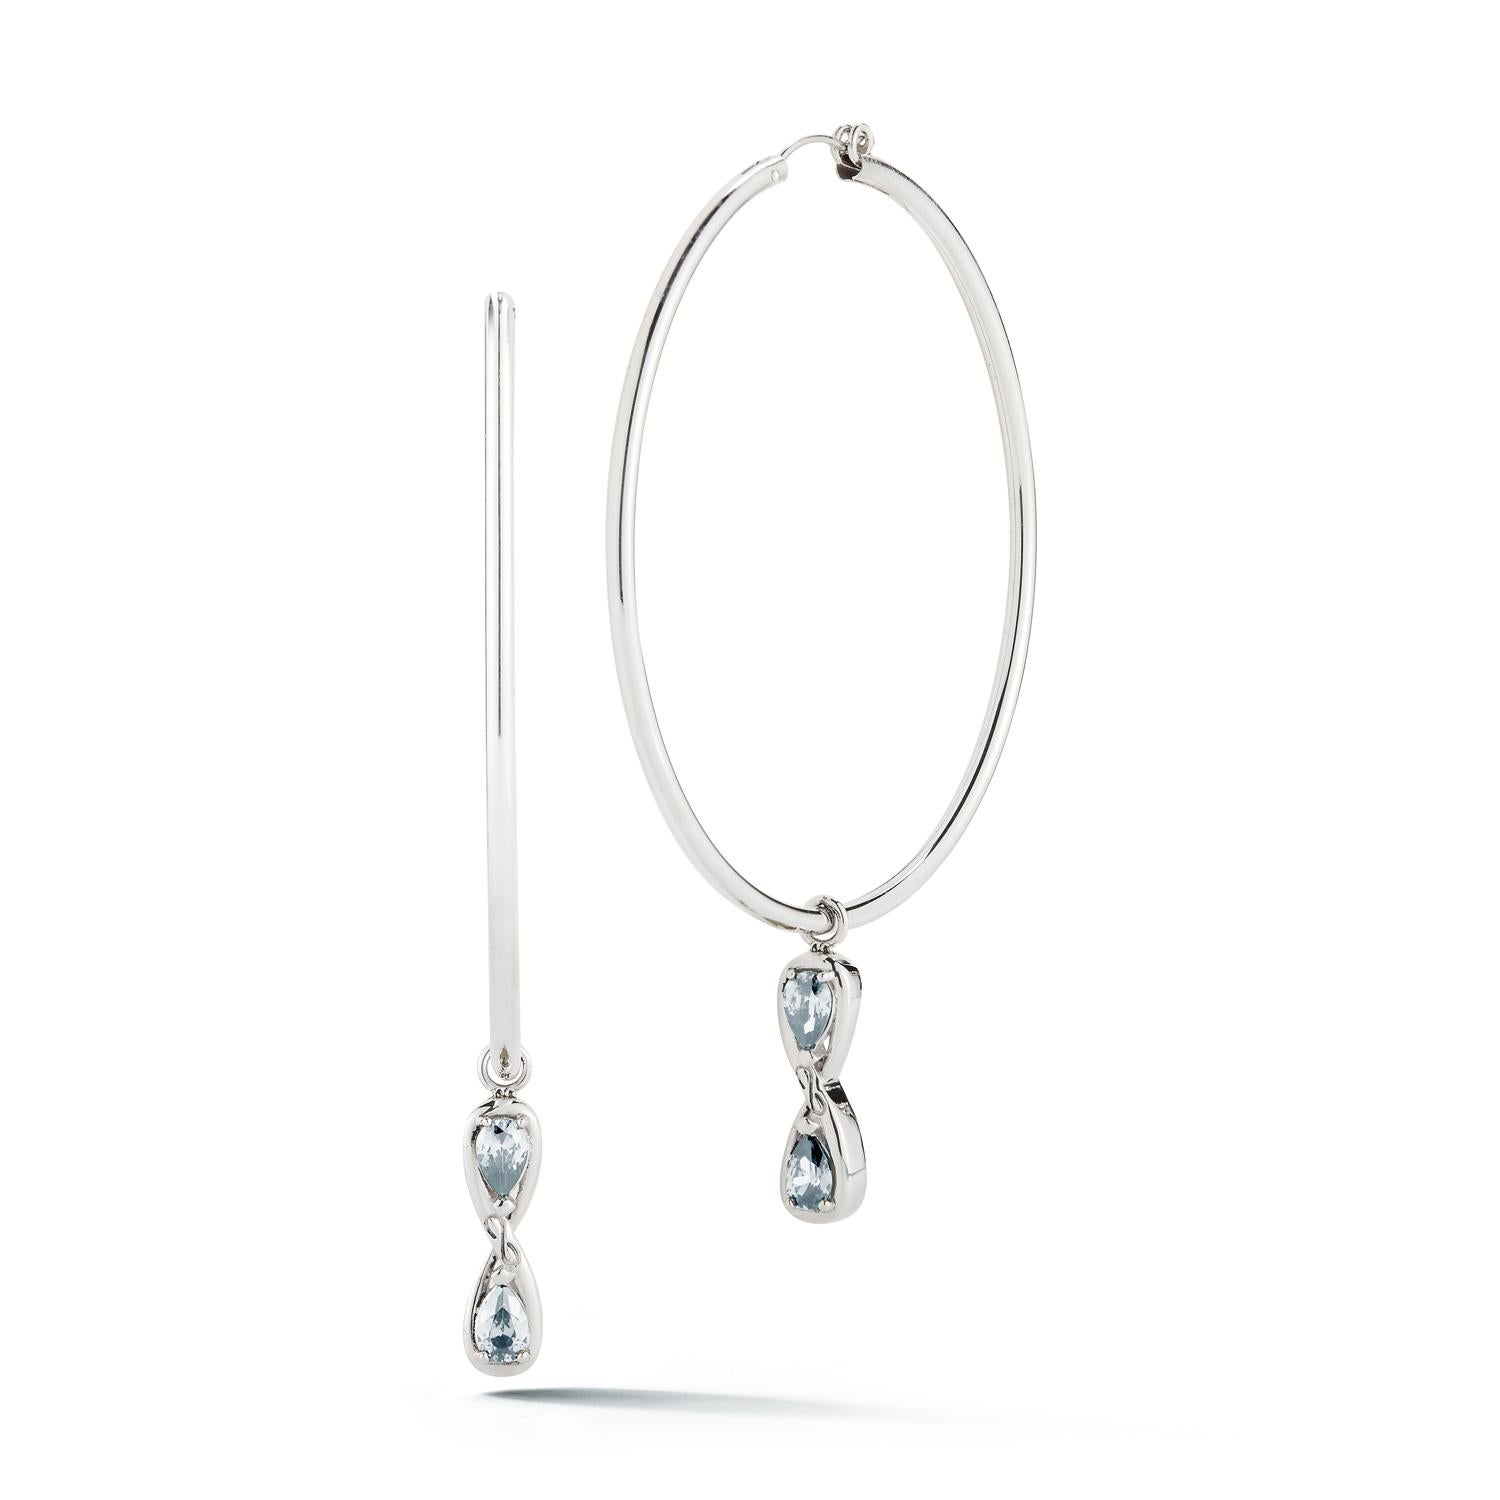 Designed in NYC

.925 Sterling Silver 6 x 4 mm Dark Blue Topaz Infinity Stone Dangle Hoops. When it comes to self-expression, the style possibilities are endless. Infinity stone dangle hoops:

Sterling silver 
High-polish finish
Light-weight 
Light